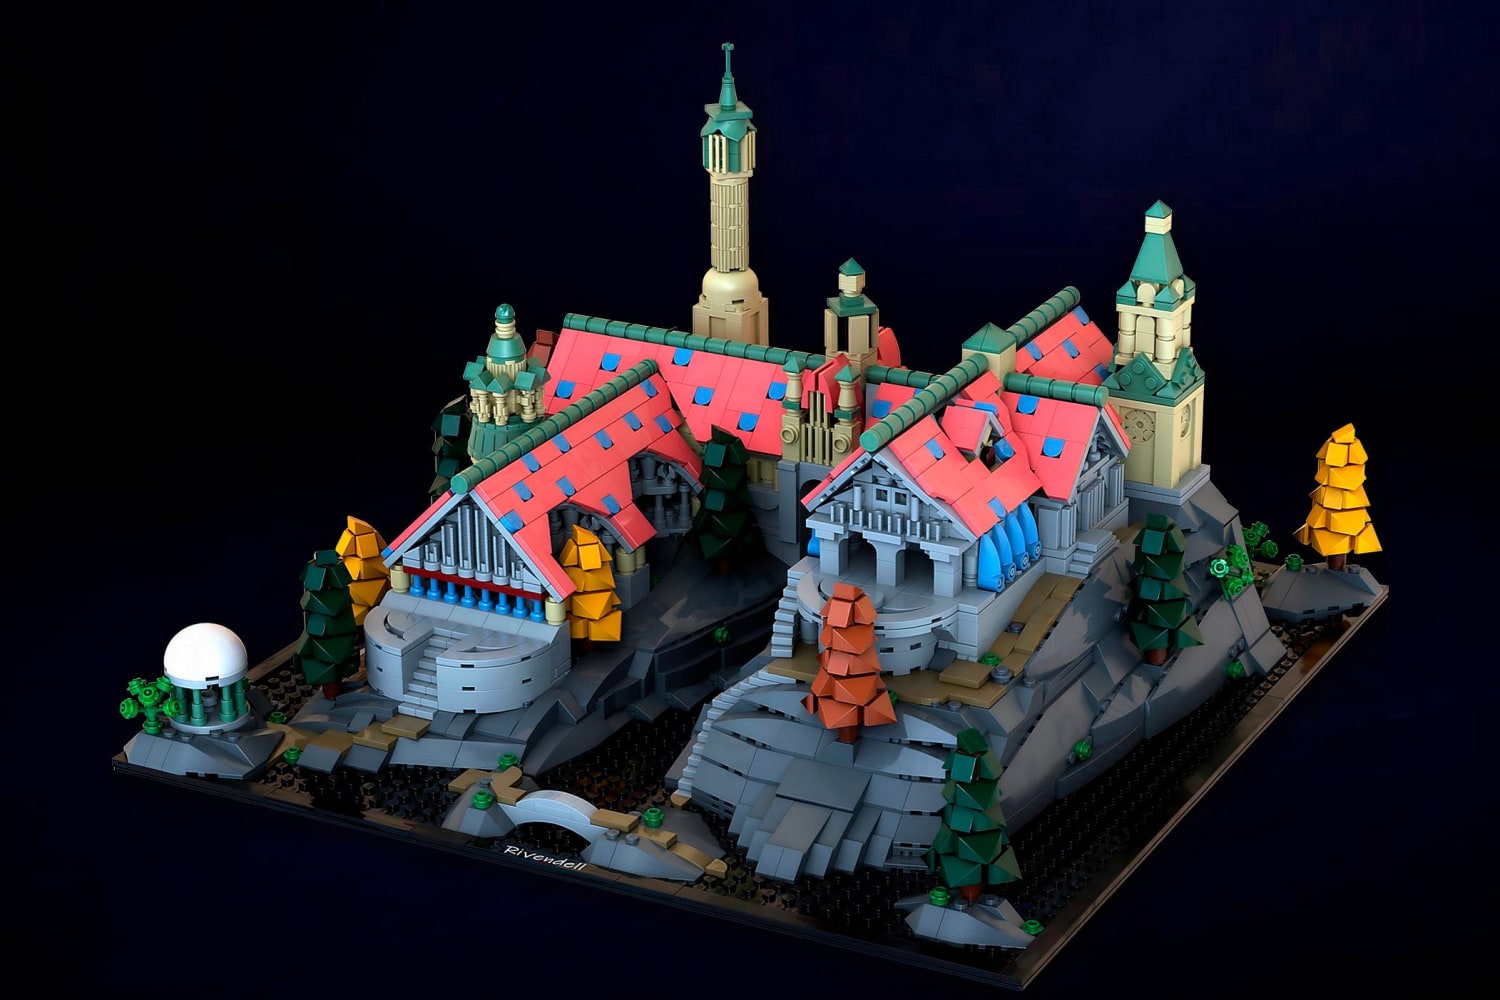 I made Rivendell in LEGO | LEGO Ideas project